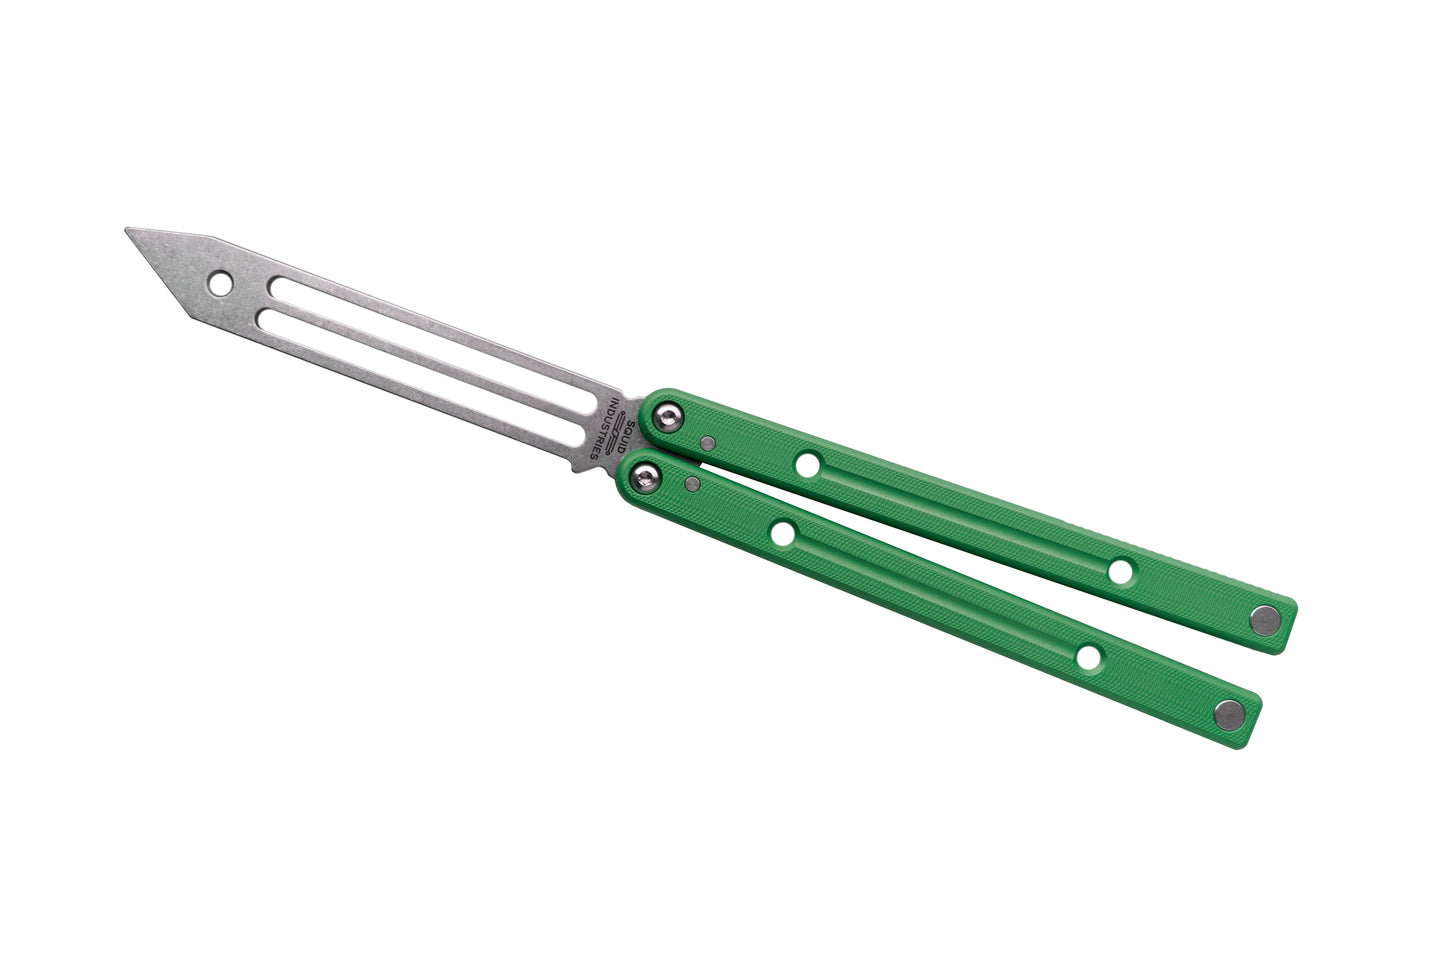 Green Clearance Blemished Squidtrainer V4 Balisong Butterfly Knife Trainer 